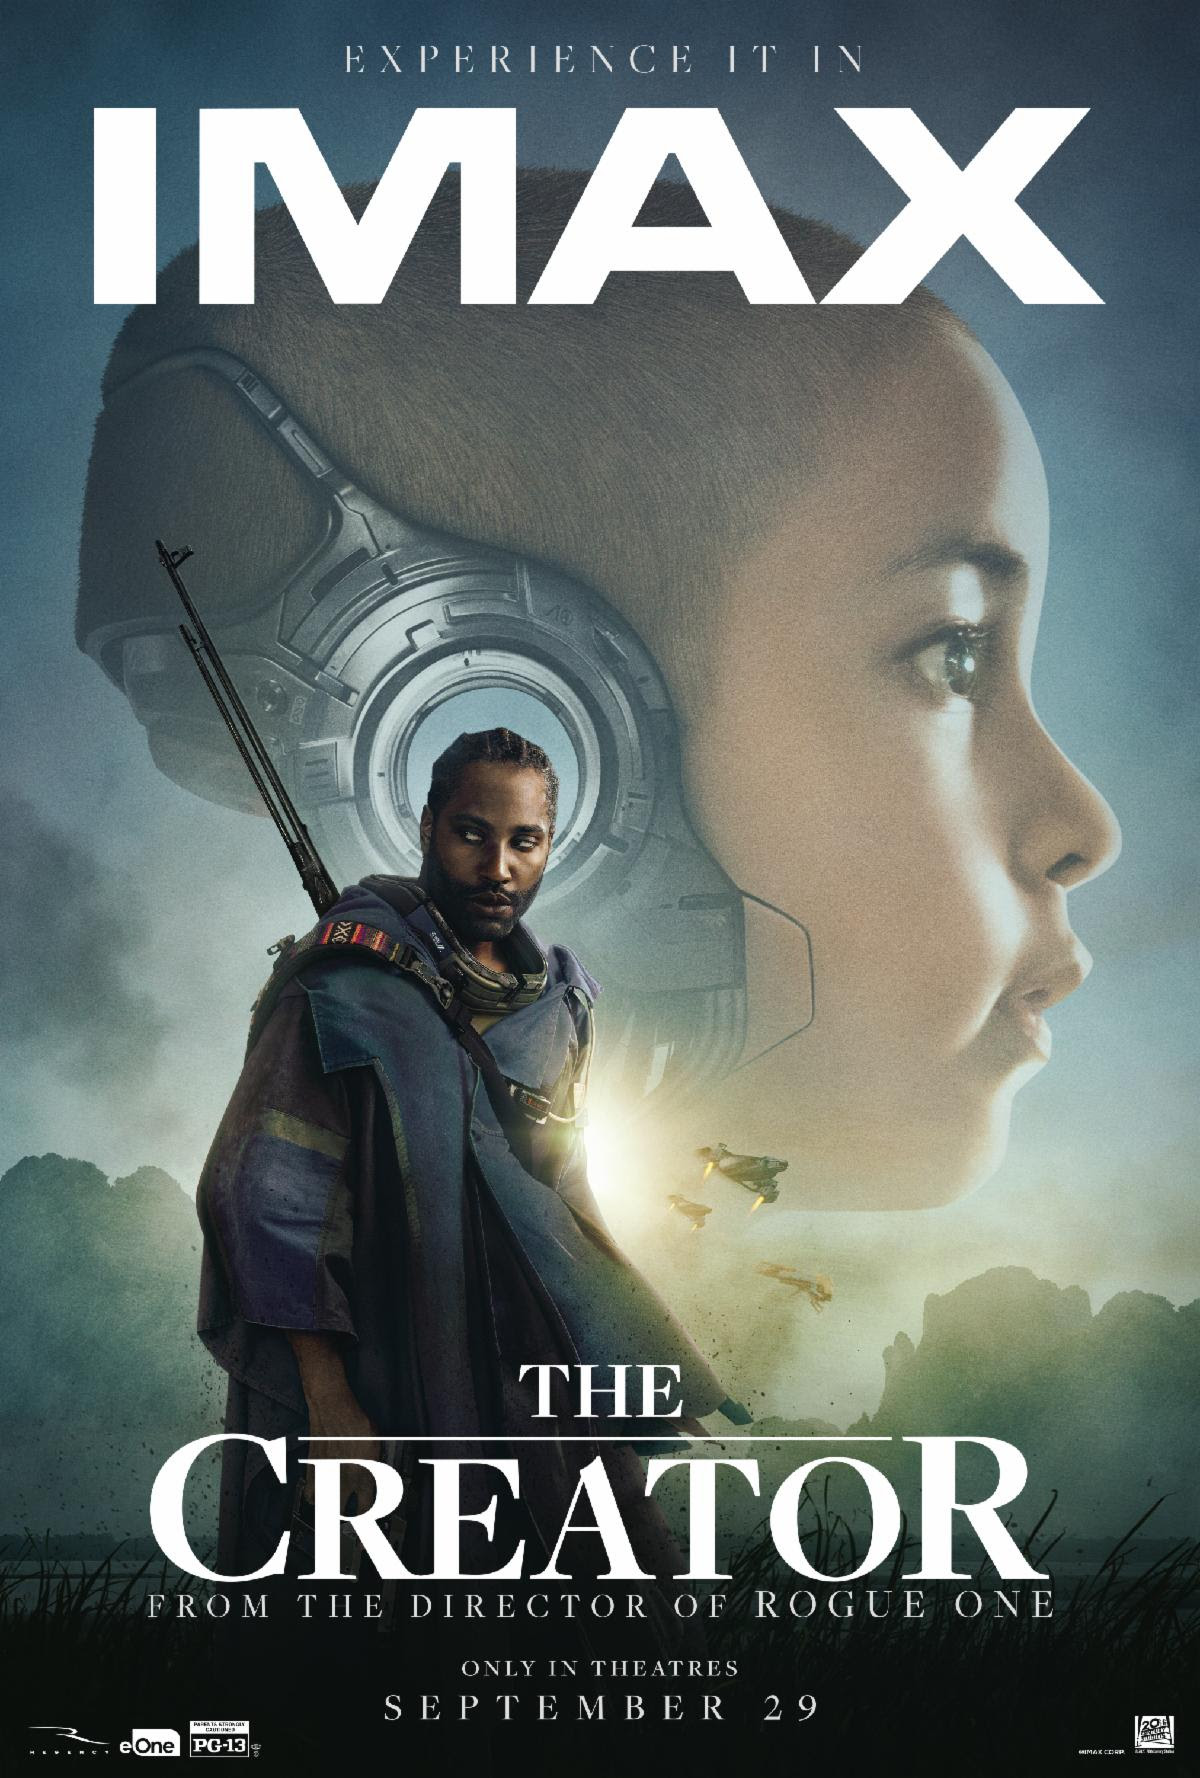 “The Creator” Serves Up An Original Story Complete With Stunning Visuals